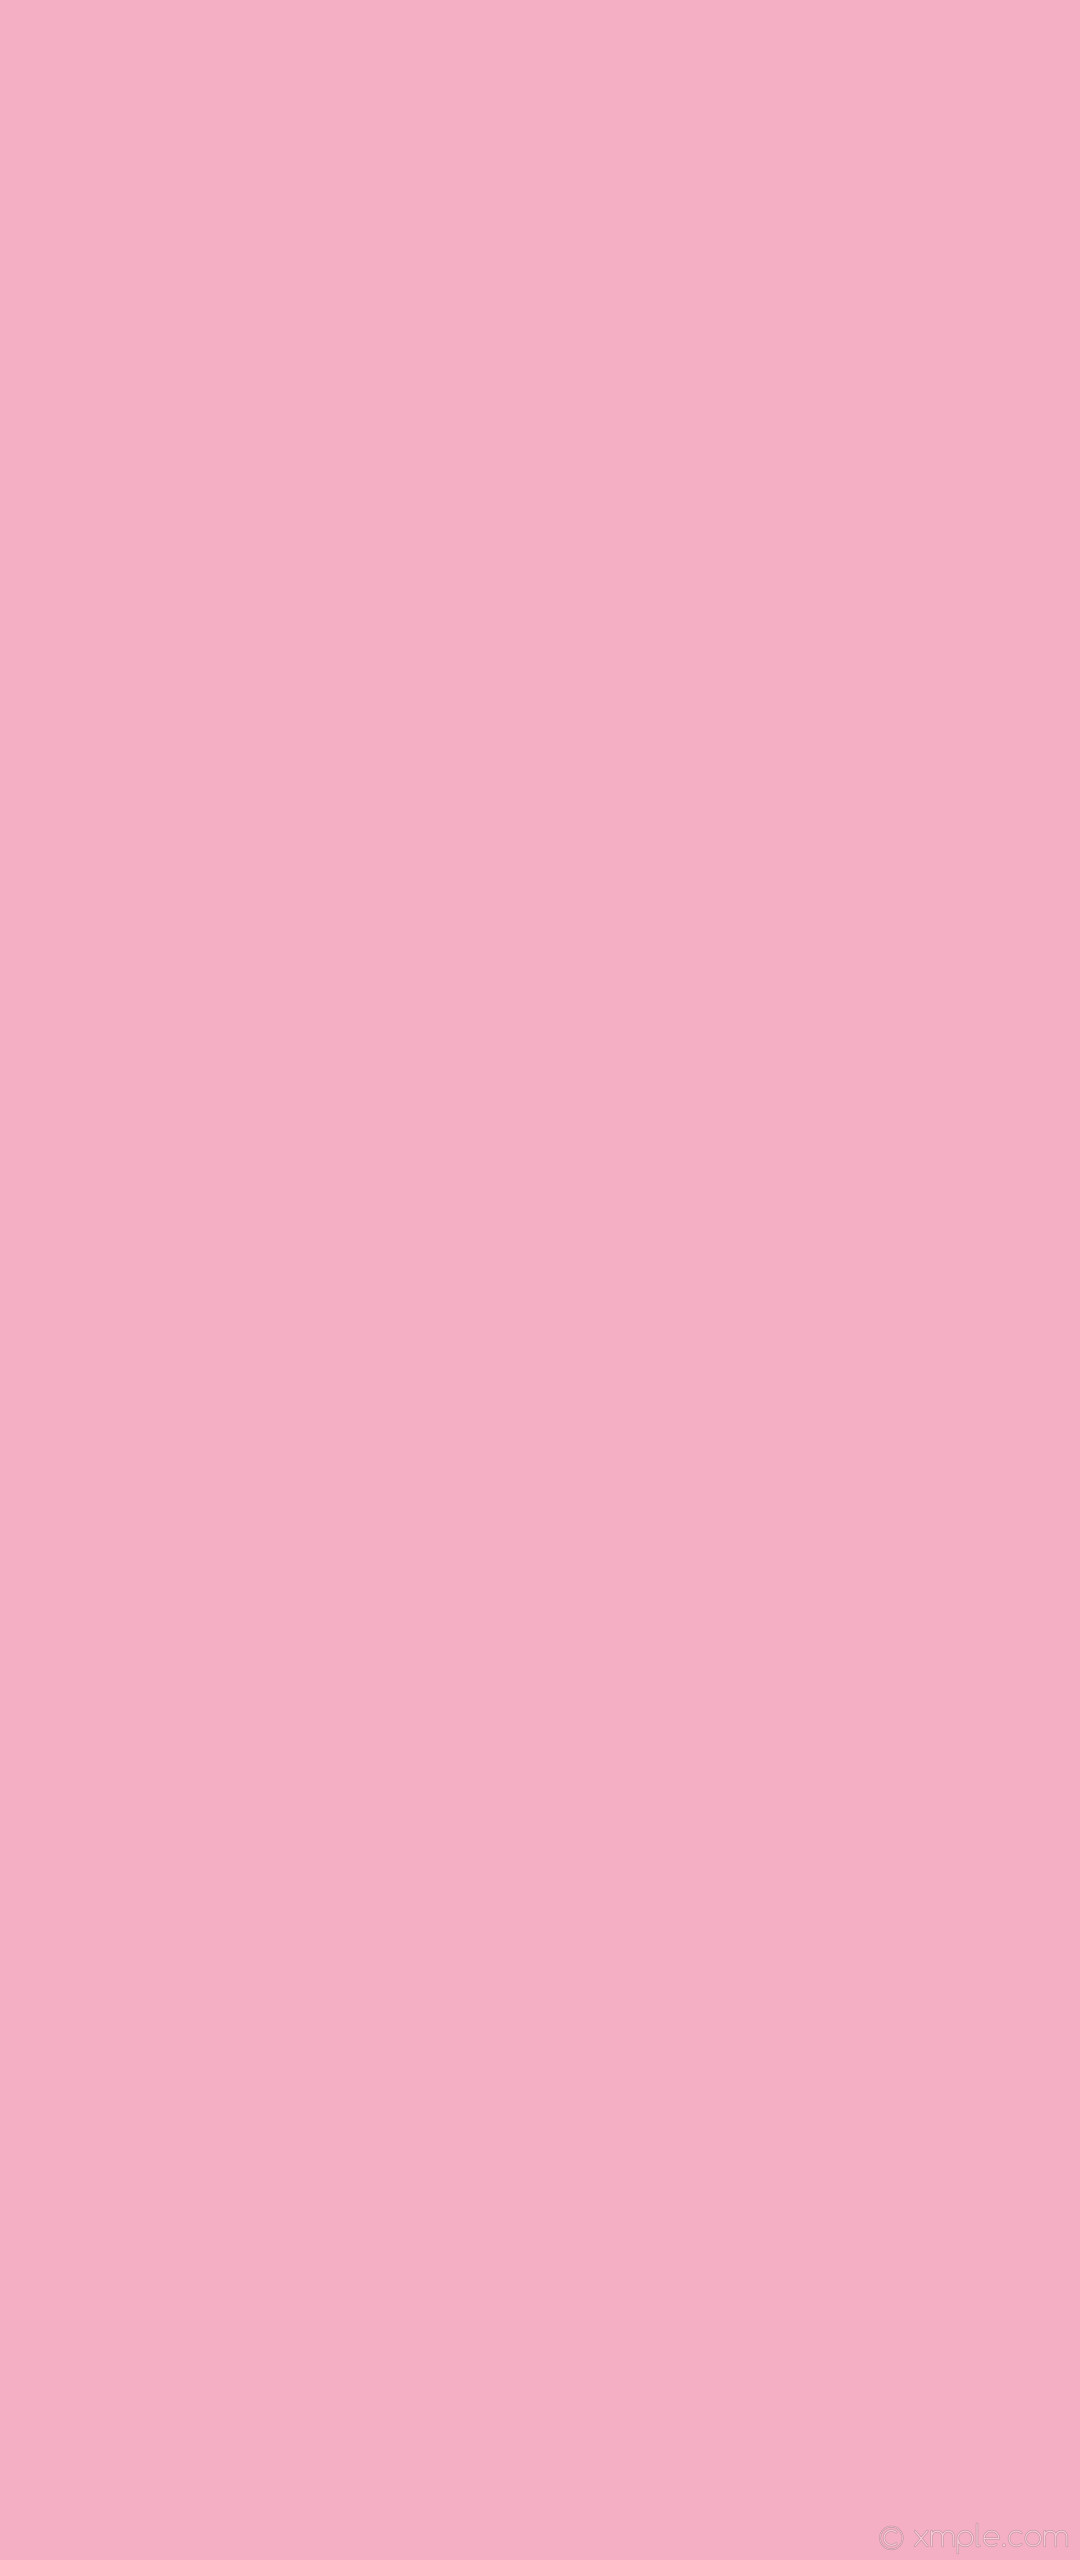 1080x2560 wallpaper pink one colour solid color plain single light pink #f4afc4